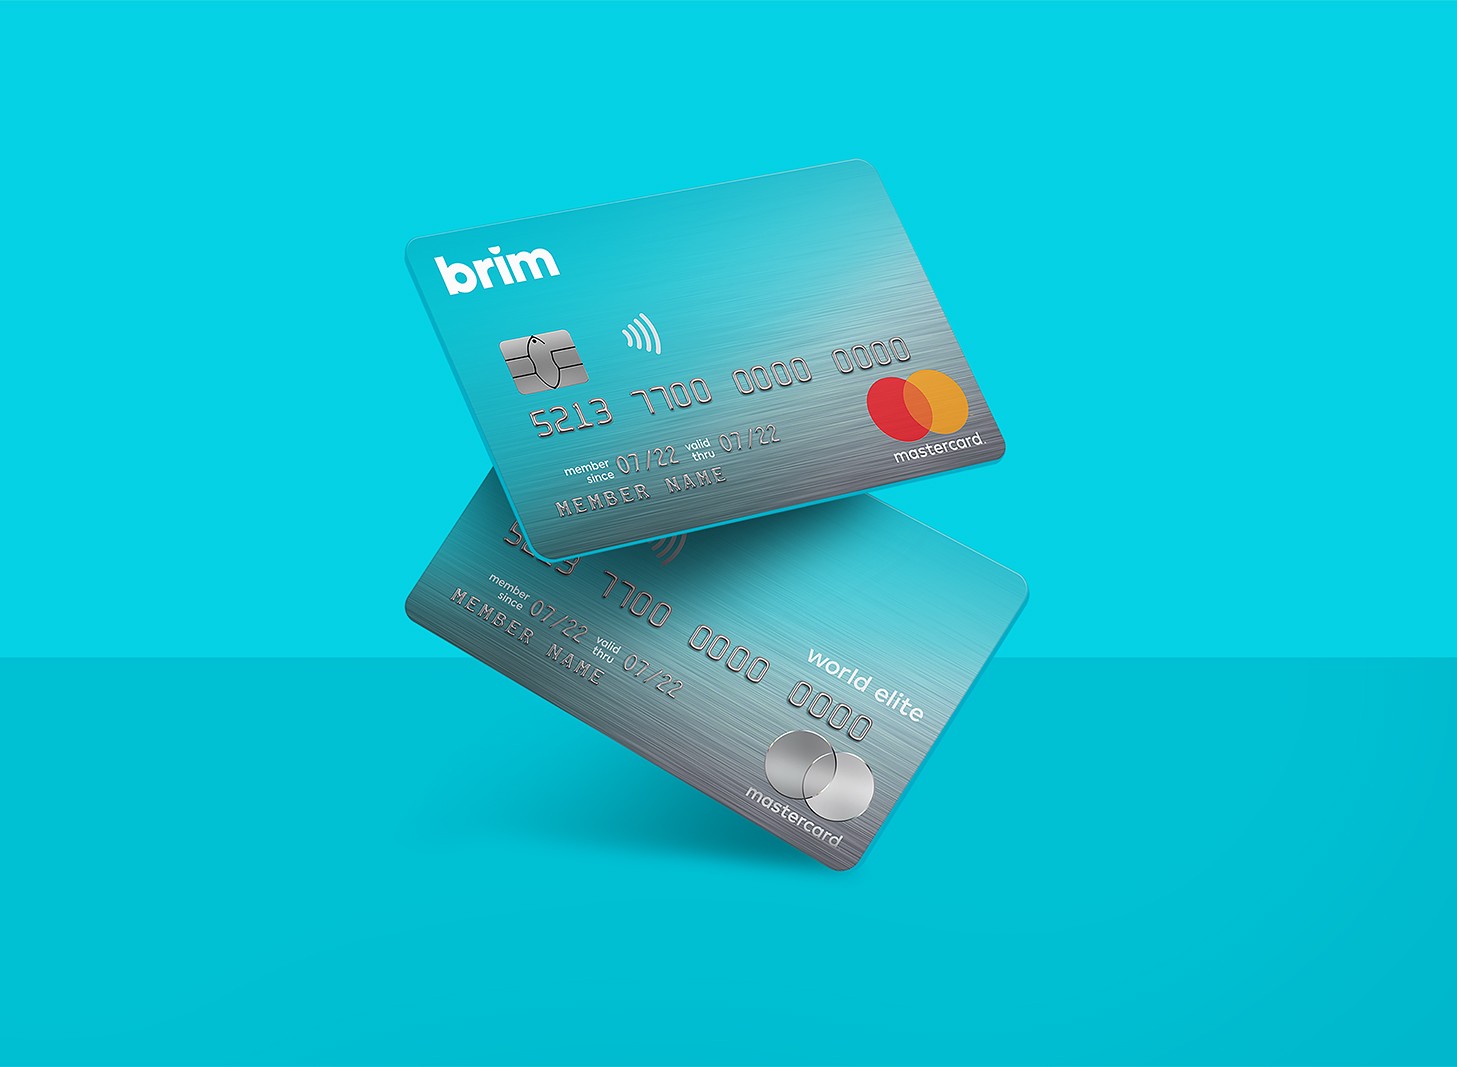 Brim World Elite Mastercard Credit Card - Learn How to Order